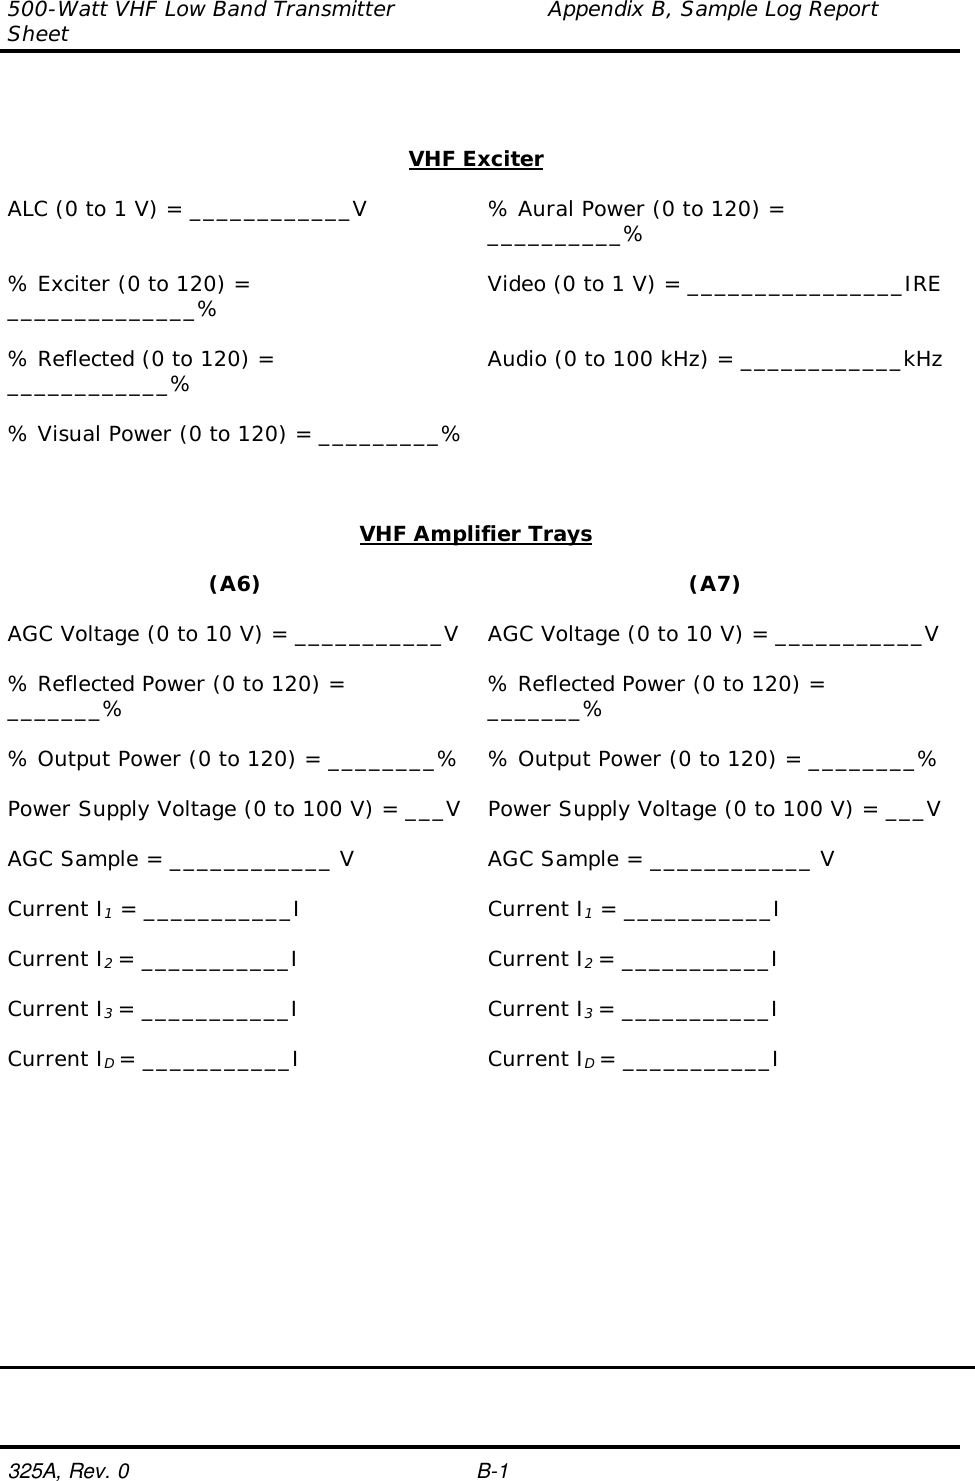 500-Watt VHF Low Band Transmitter                     Appendix B, Sample Log ReportSheet325A, Rev. 0 B-1VHF ExciterALC (0 to 1 V) = ____________V % Aural Power (0 to 120) =__________%% Exciter (0 to 120) =______________% Video (0 to 1 V) = ________________IRE% Reflected (0 to 120) =____________% Audio (0 to 100 kHz) = ____________kHz% Visual Power (0 to 120) = _________%VHF Amplifier Trays(A6) (A7)AGC Voltage (0 to 10 V) = ___________V AGC Voltage (0 to 10 V) = ___________V% Reflected Power (0 to 120) =_______% % Reflected Power (0 to 120) =_______%% Output Power (0 to 120) = ________% % Output Power (0 to 120) = ________%Power Supply Voltage (0 to 100 V) = ___V Power Supply Voltage (0 to 100 V) = ___VAGC Sample = ____________ V AGC Sample = ____________ VCurrent I1 = ___________I Current I1 = ___________ICurrent I2 = ___________I Current I2 = ___________ICurrent I3 = ___________I Current I3 = ___________ICurrent ID = ___________I Current ID = ___________I